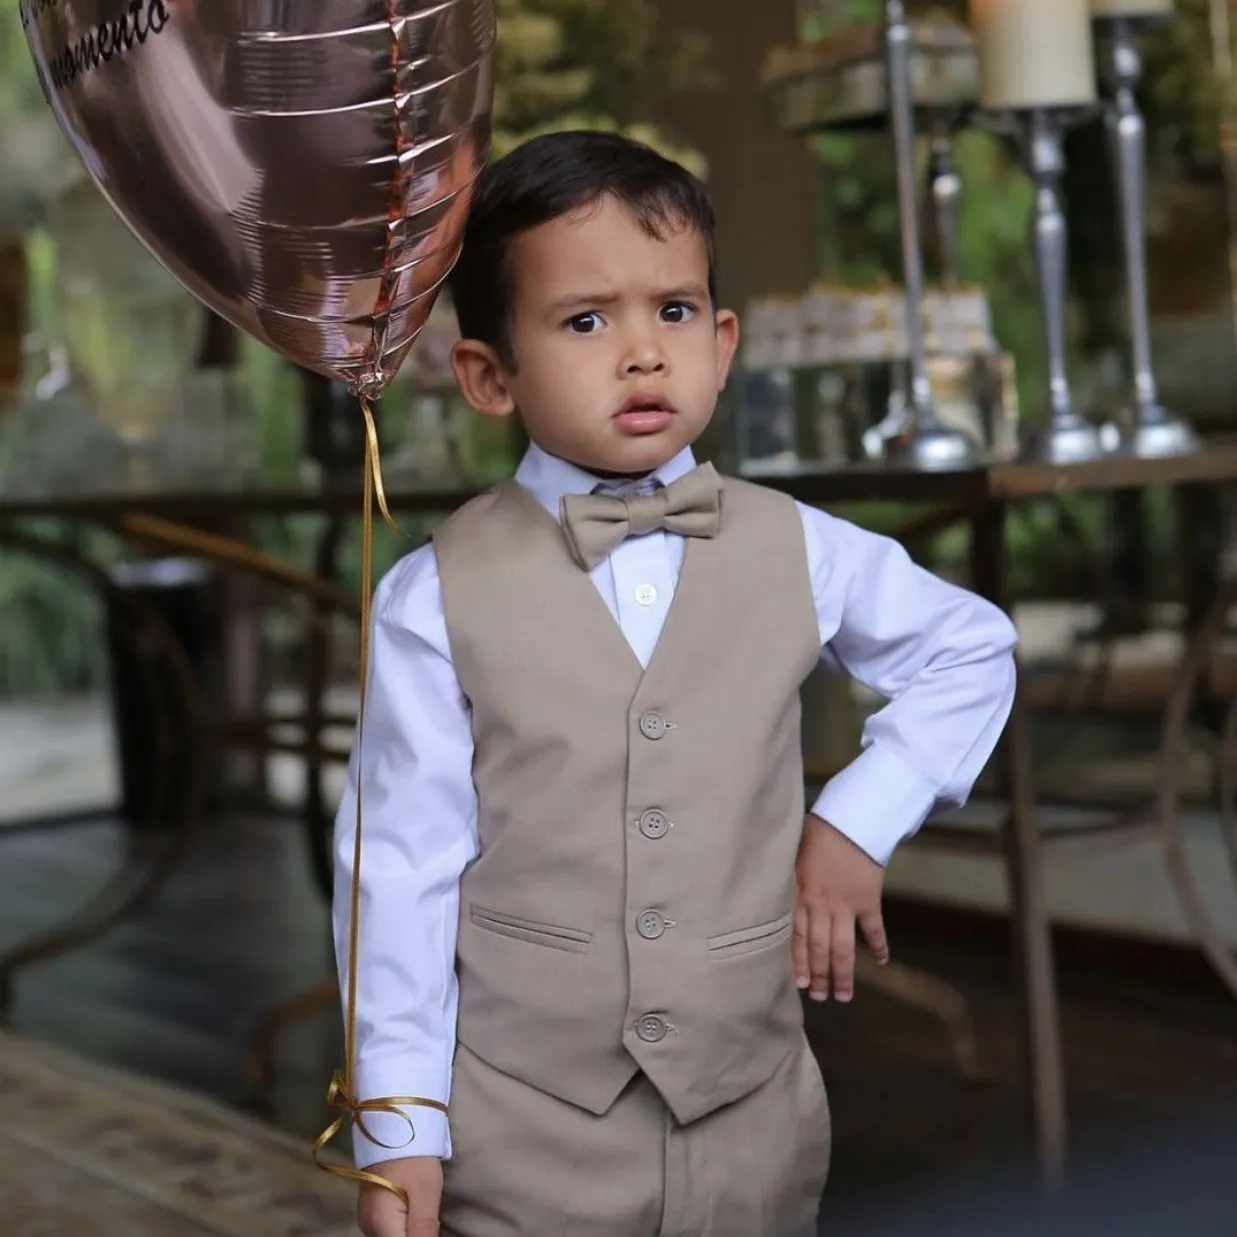 Boys Formal Wear Set: Ring Bearer Vest And Pants For Tuxedo, Wedding Party,  And Kids Suit With Vest With Bow Tie From Jiekk, $52.87